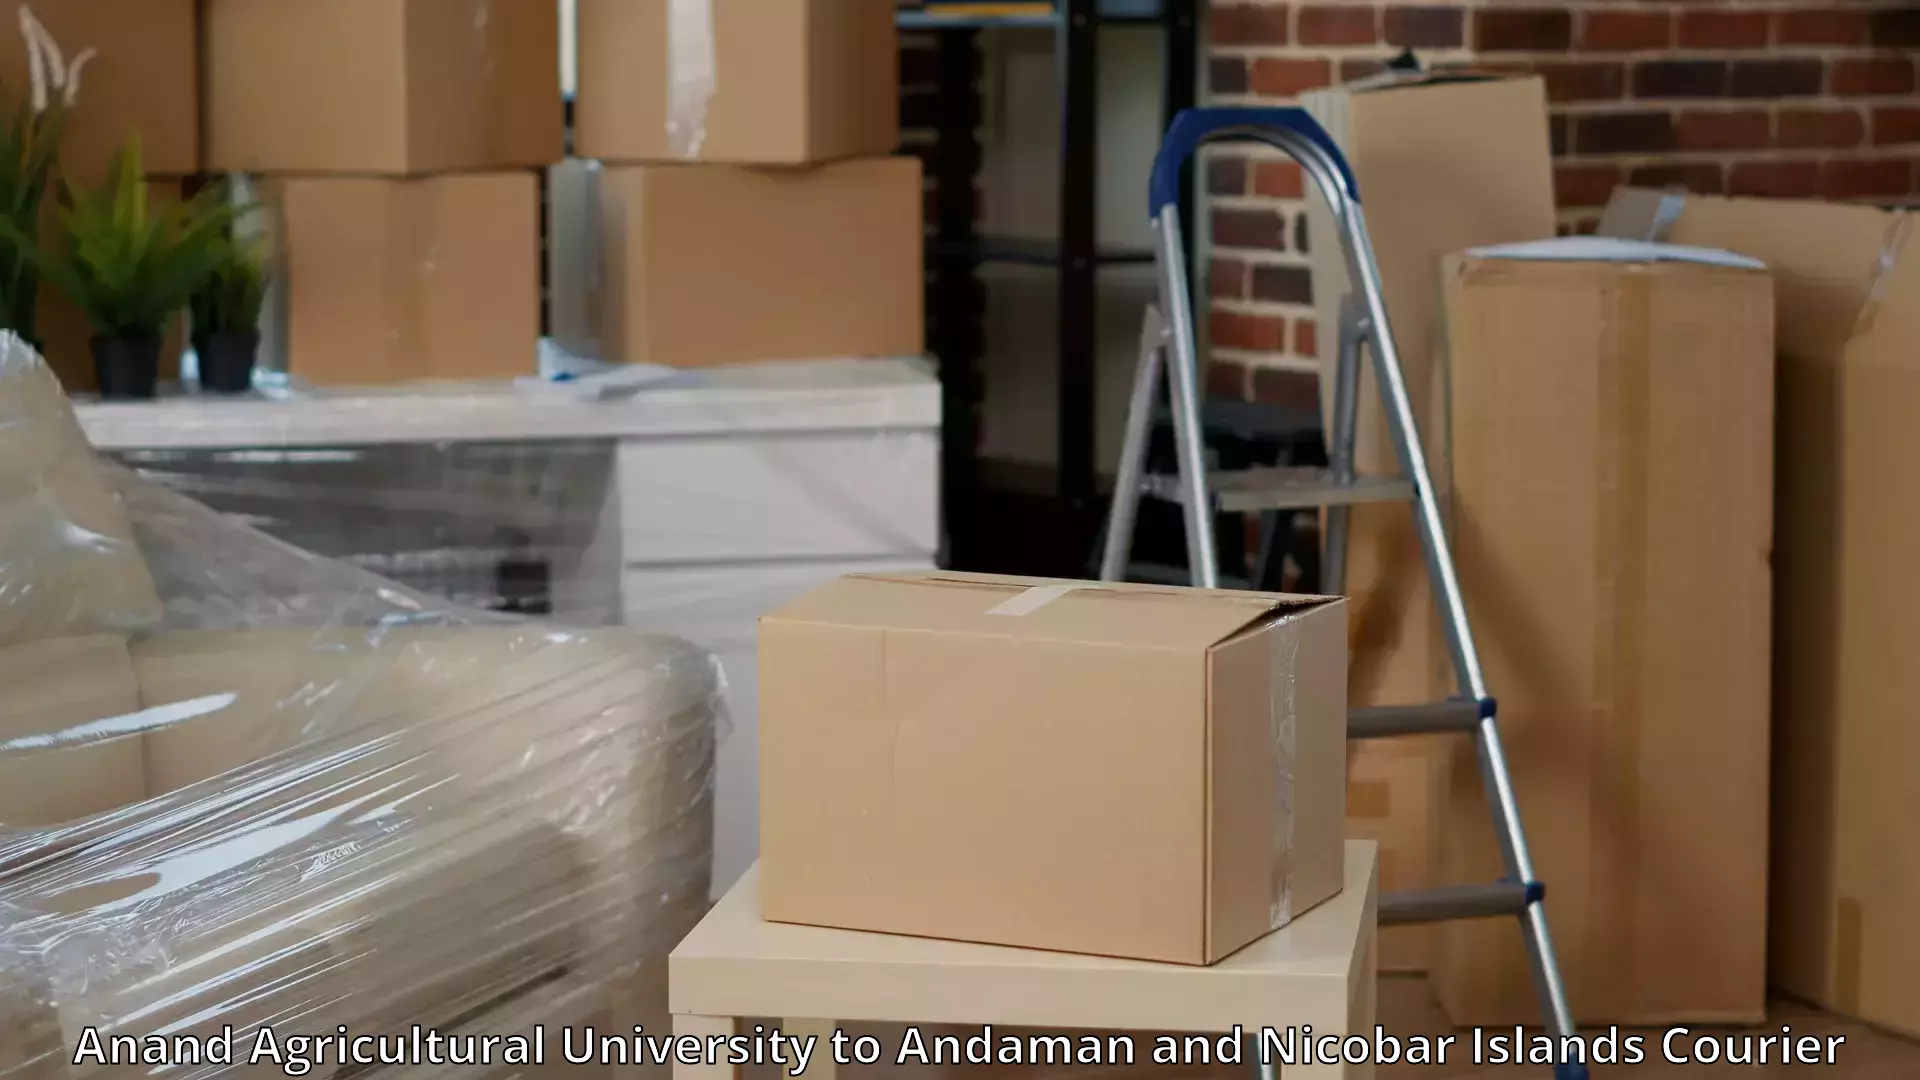 Efficient household movers Anand Agricultural University to South Andaman